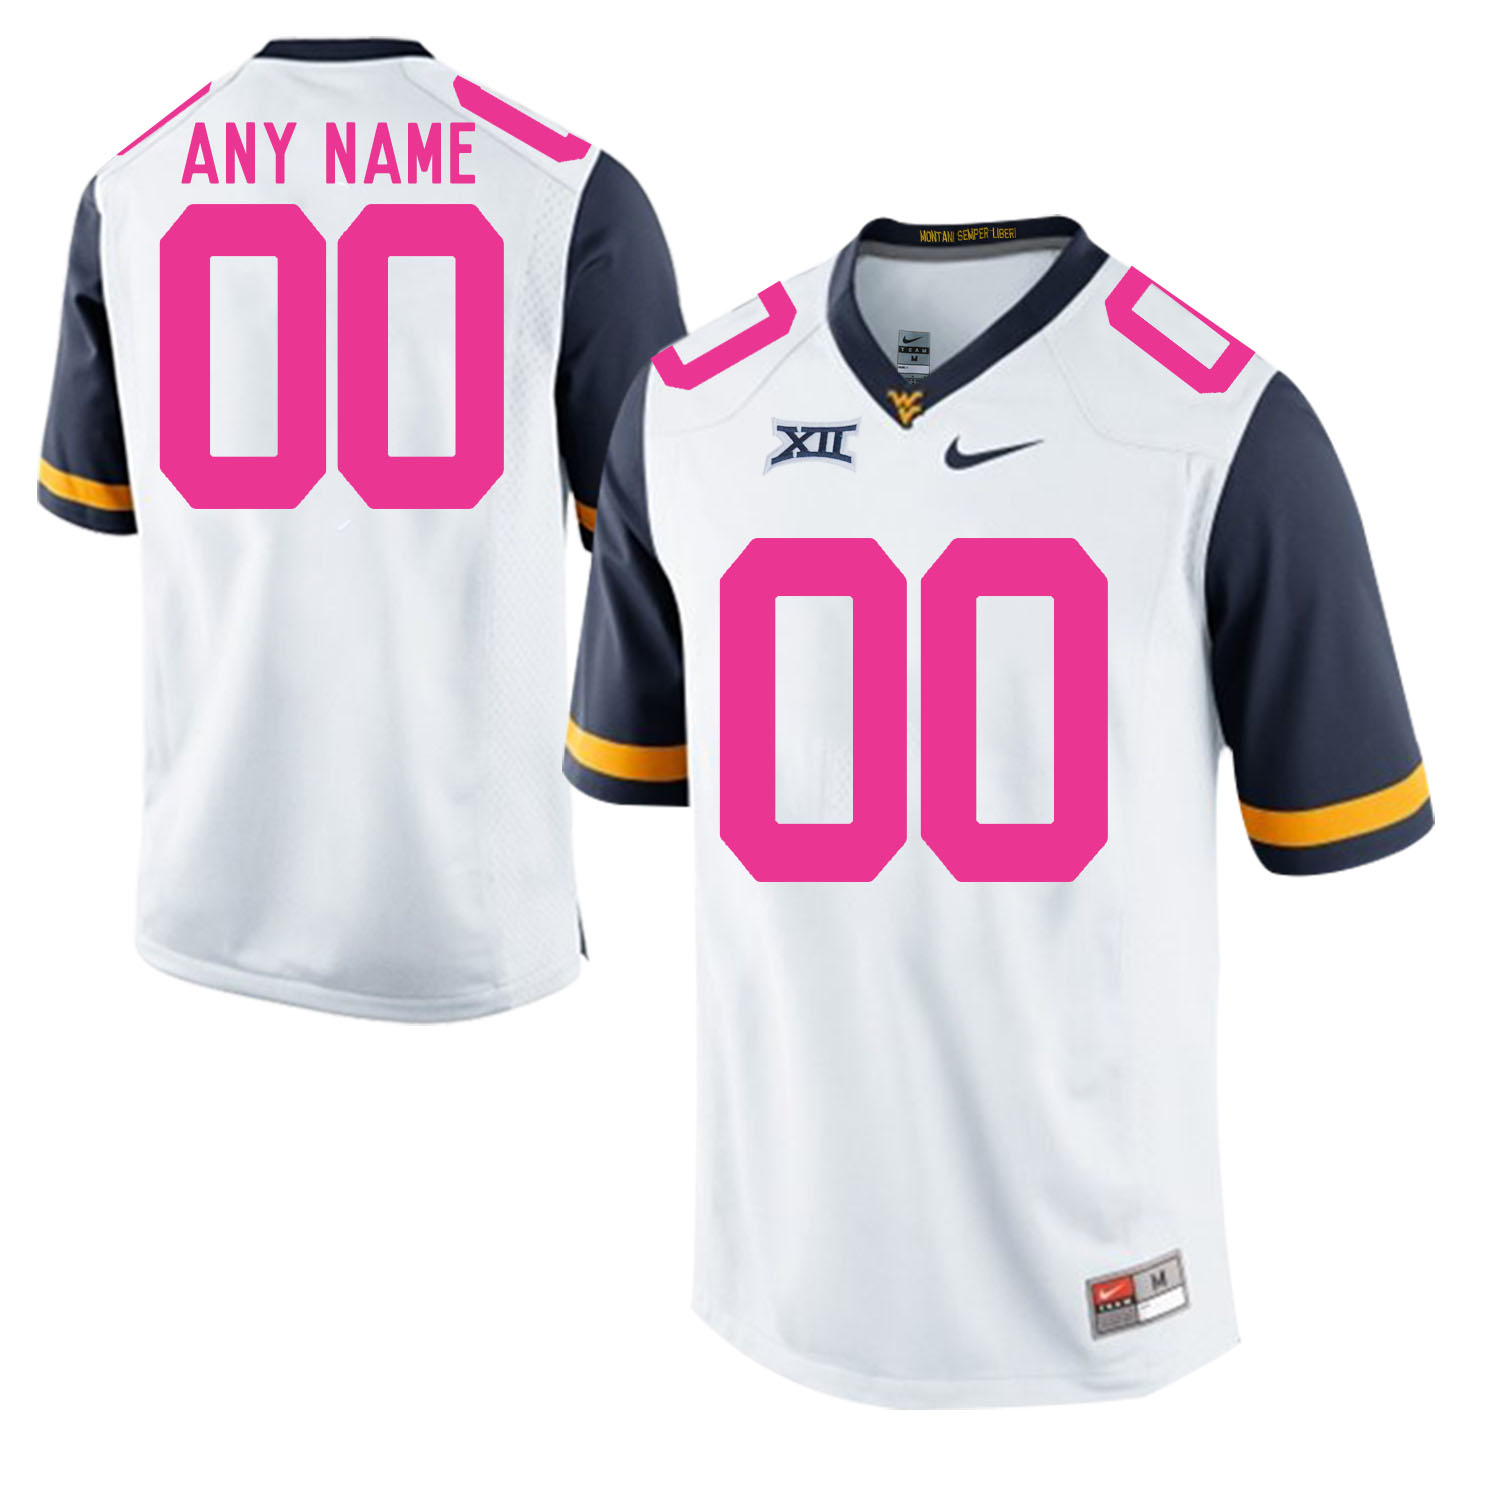 West Virginia Mountaineers White Men's Customized 2018 Breast Cancer Awareness College Football Jersey